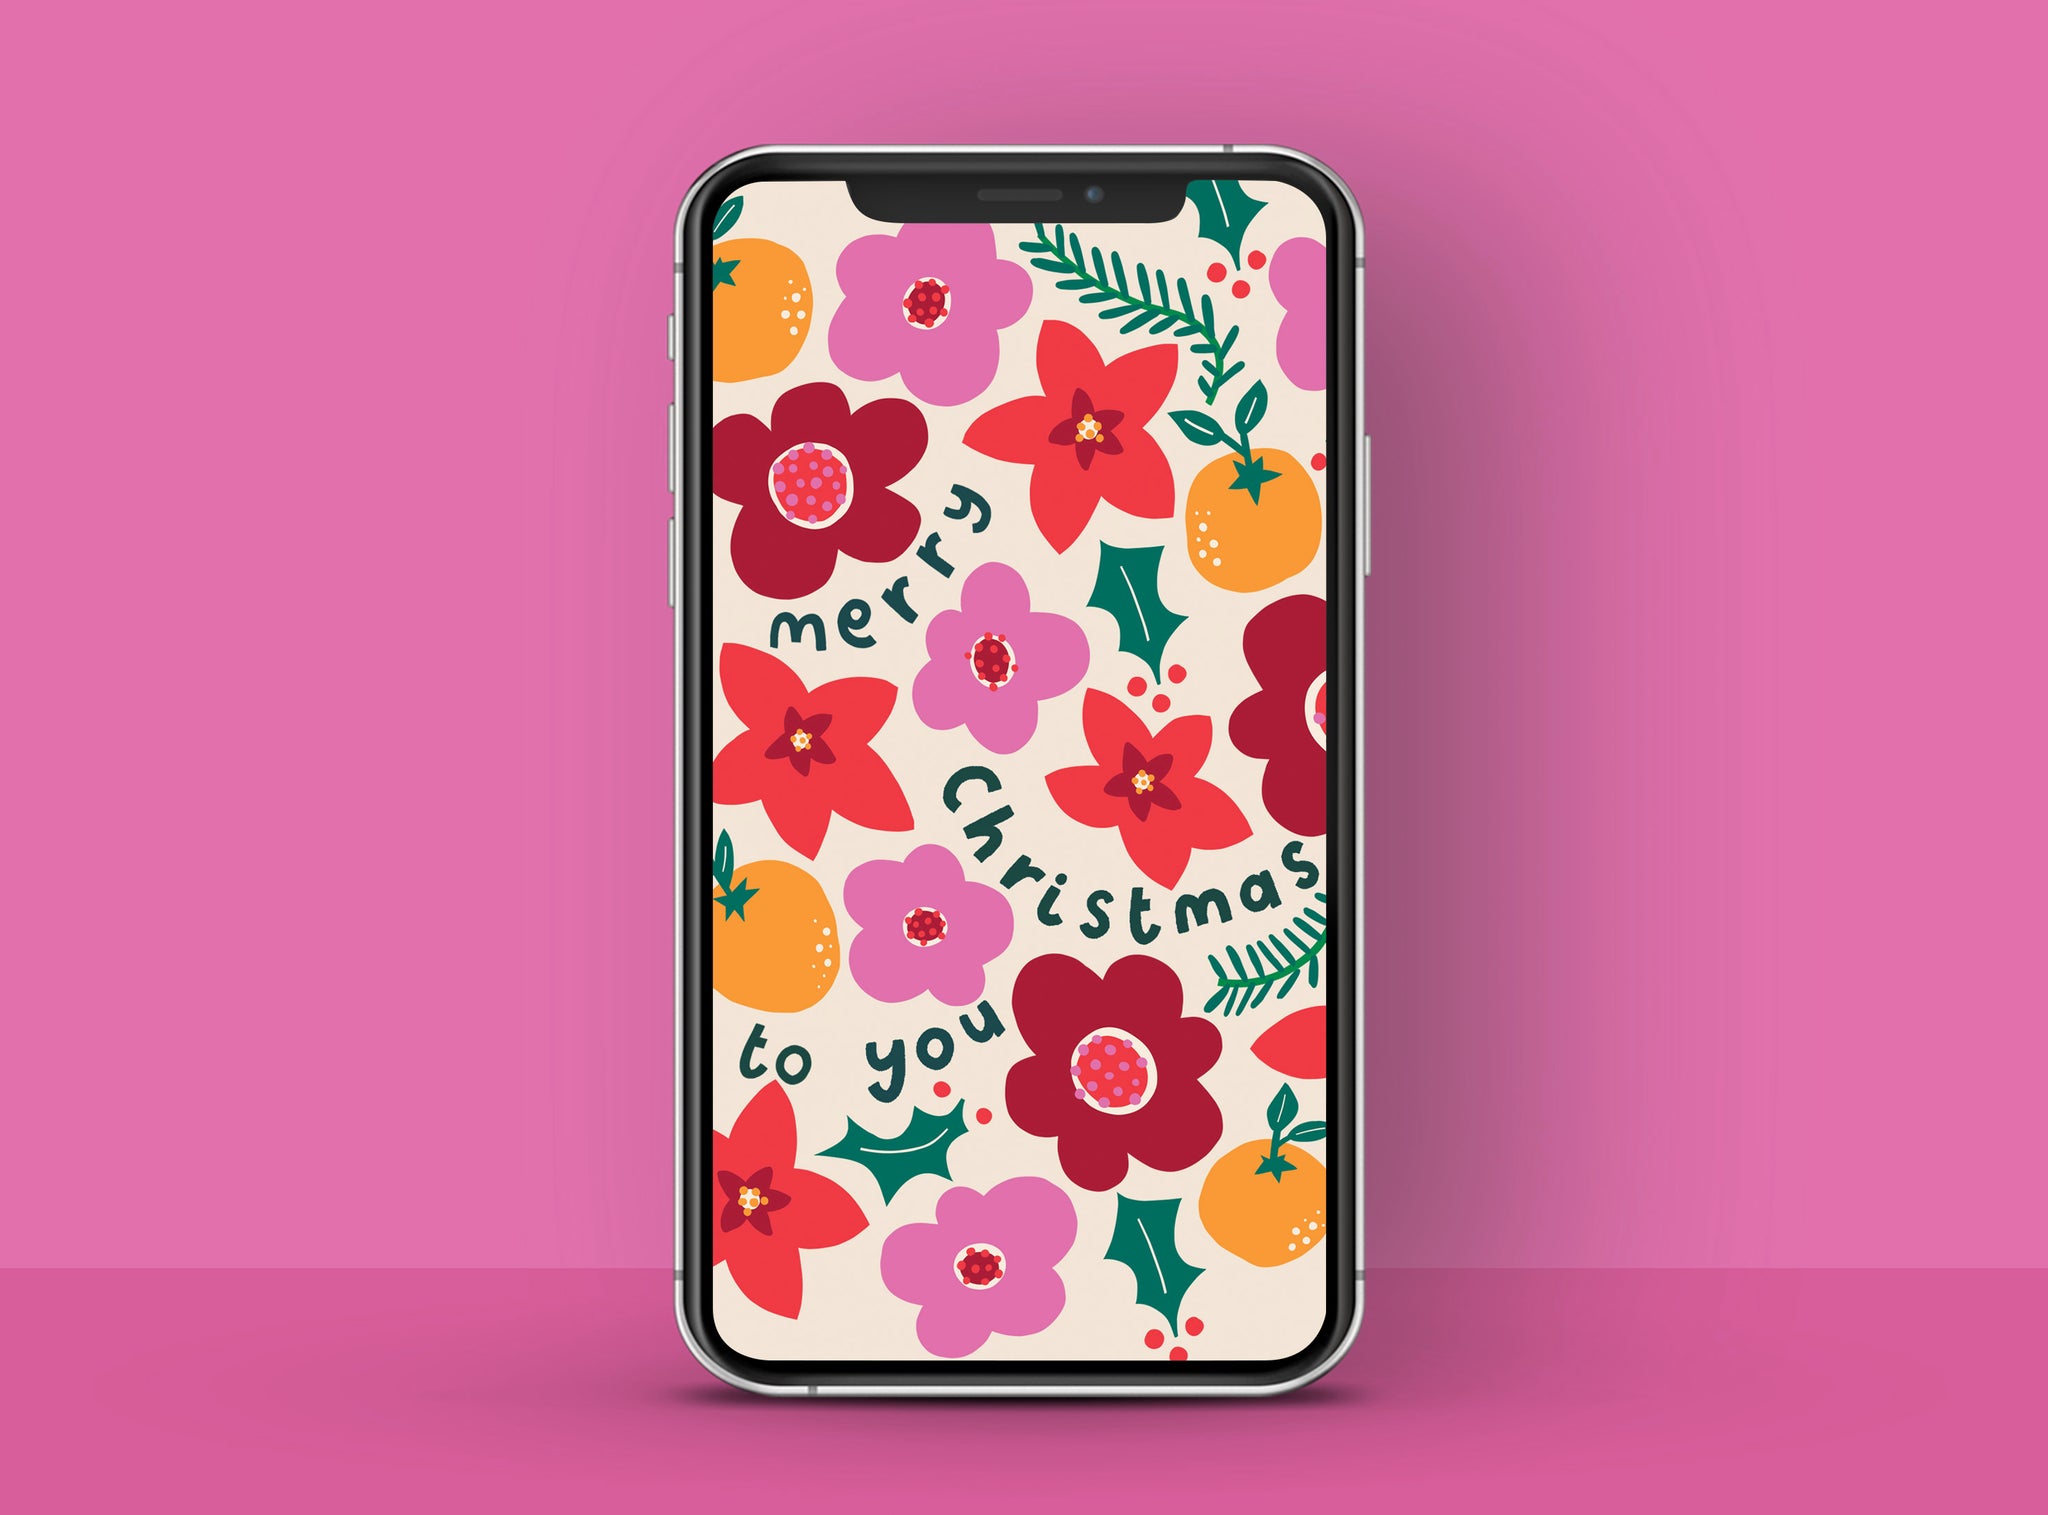 Winter foliage pattern with 'Merry Christmas to you' message phone wallpaper | Raspberry Blossom